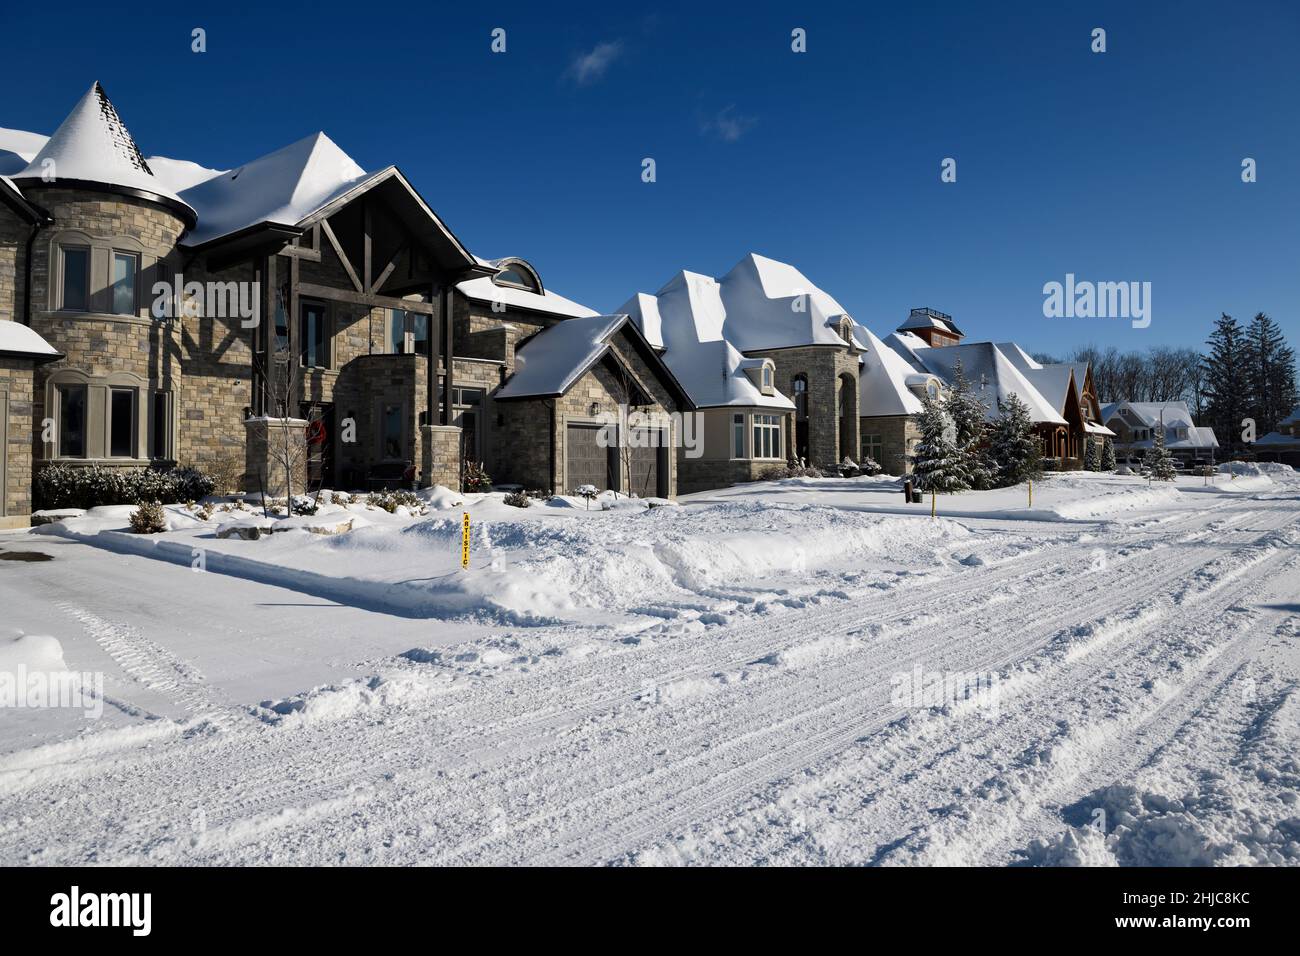 New large homes in sun after a fresh snowfall on a snowy street in Ontario Canada winter with blue sky Stock Photo